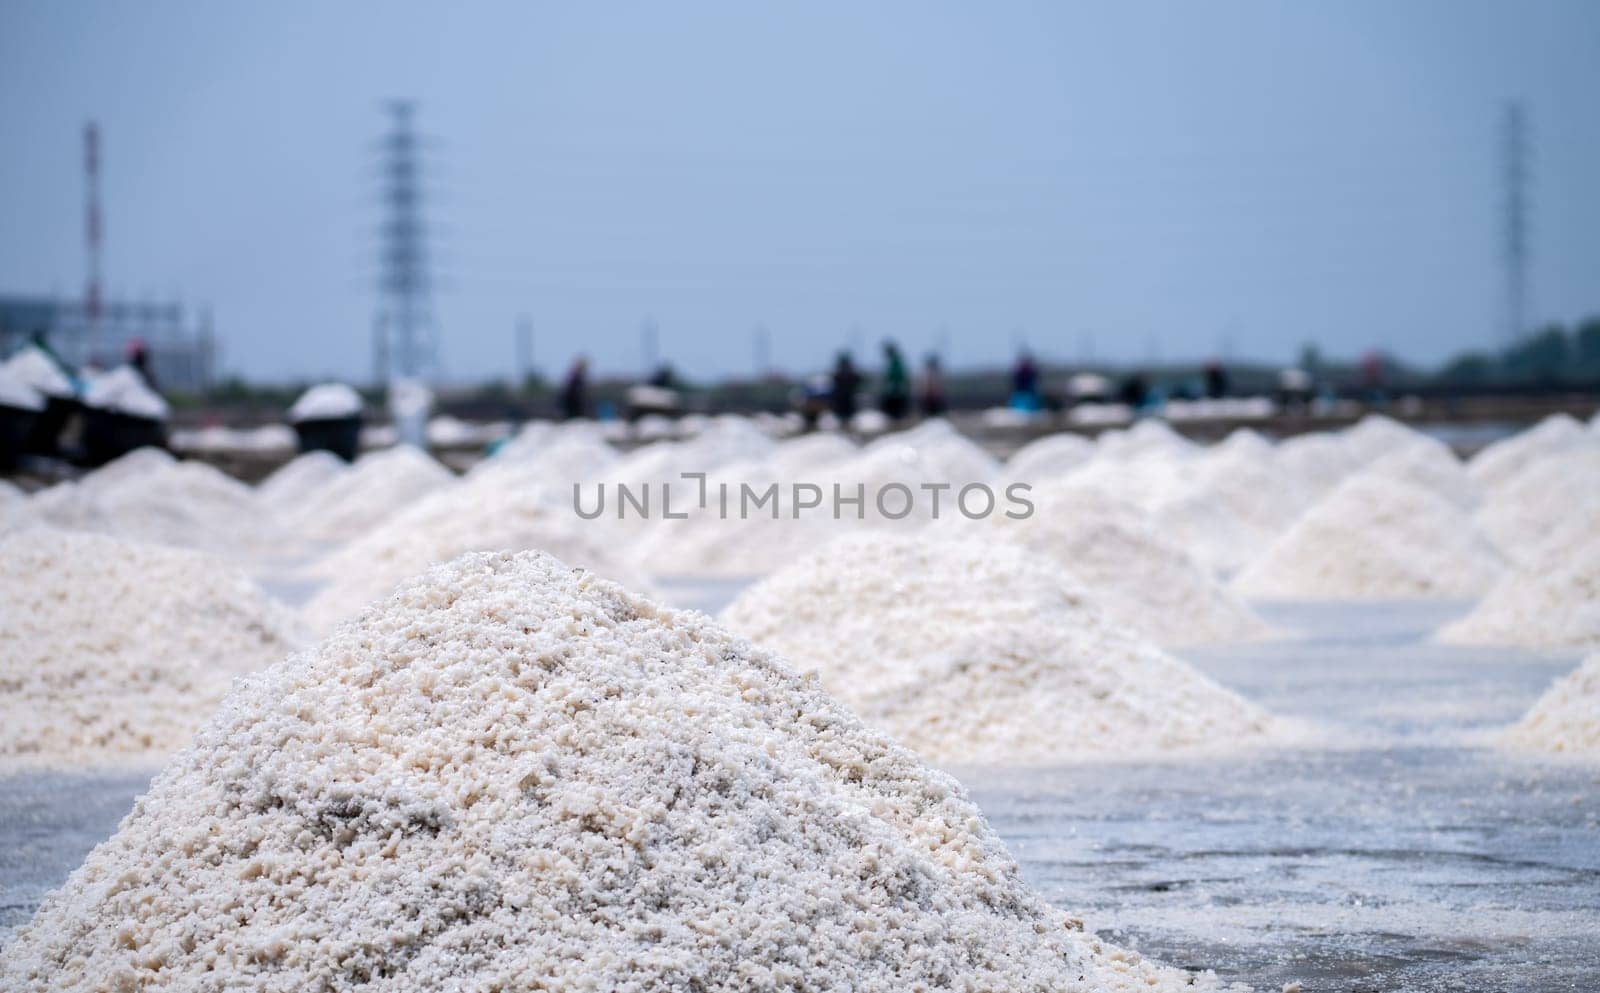 Sea salt farm and blur worker working on farm. Brine salt. Raw material of salt industrial. Sodium Chloride. Evaporation and crystallization of sea water. White salt harvesting. Agriculture industry. by Fahroni